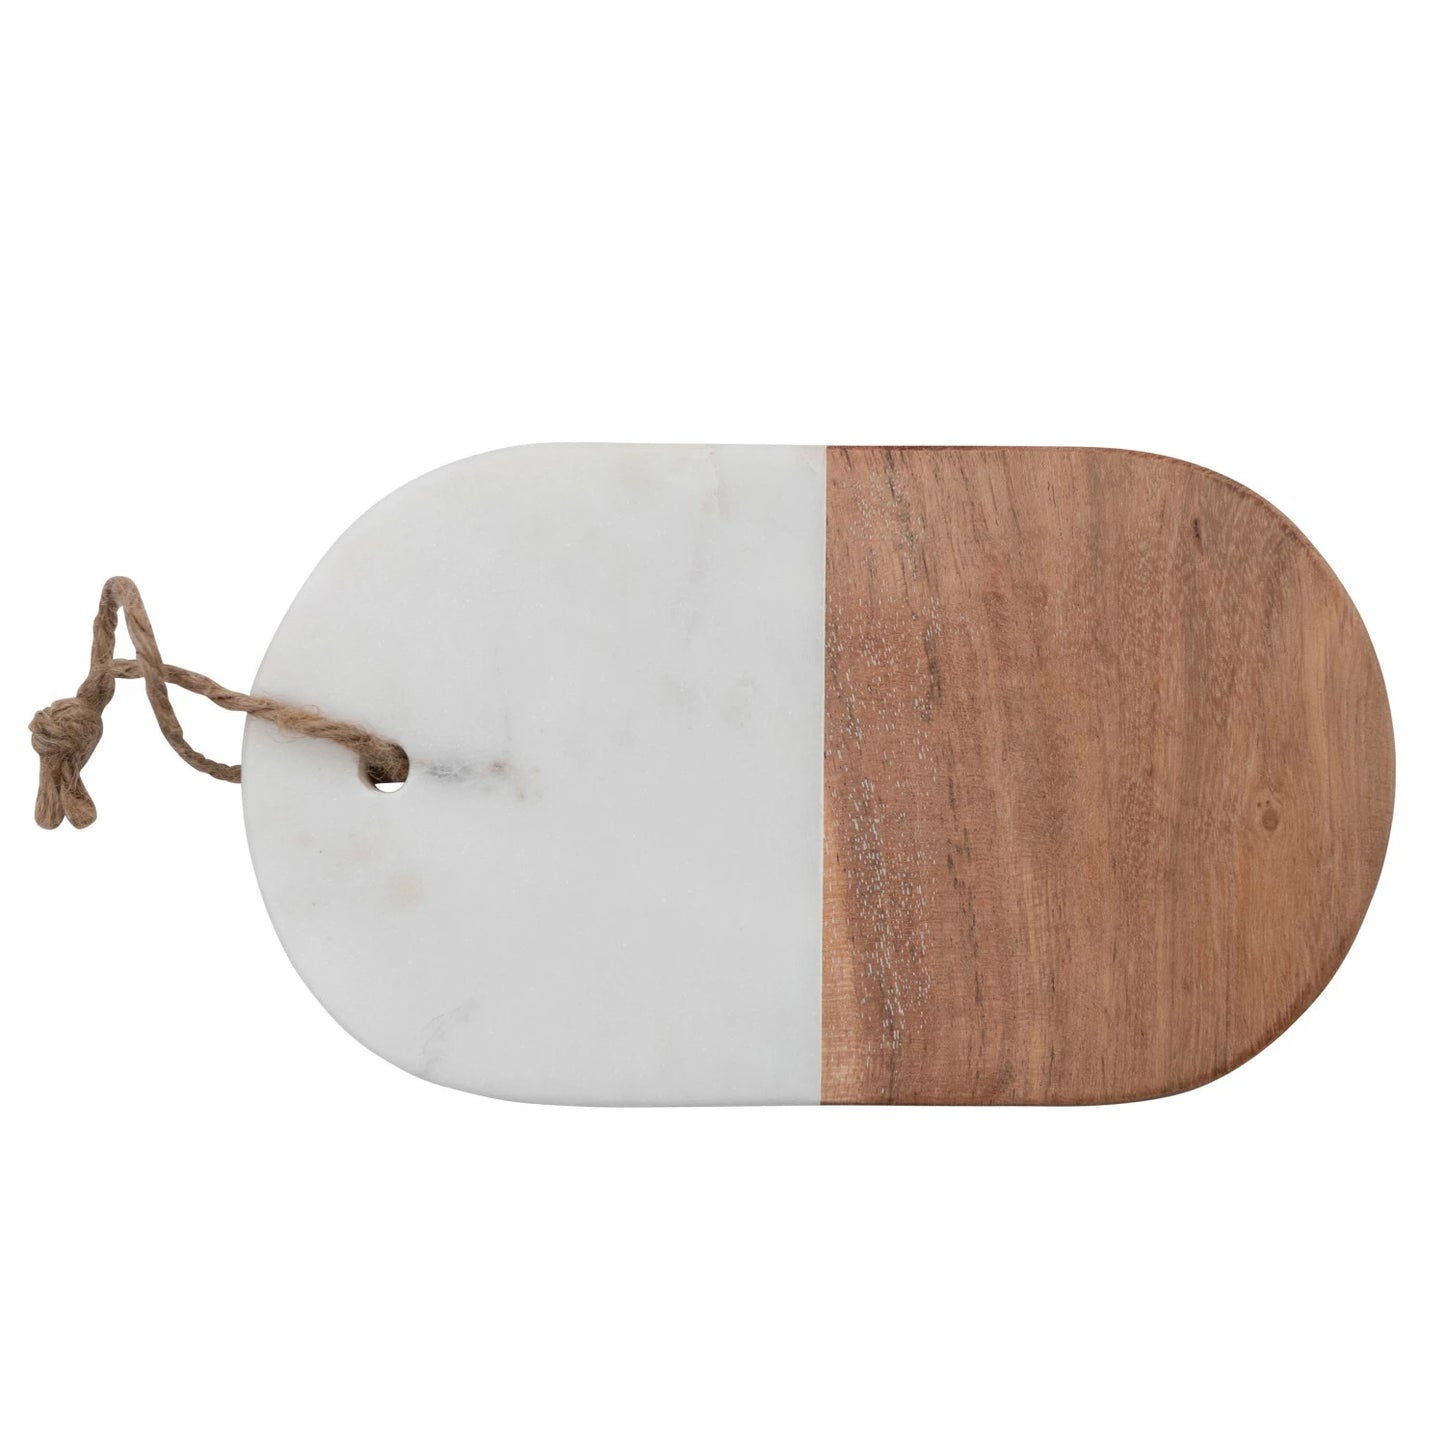 White Marble + Wood Cutting Board, The Feathered Farmhouse